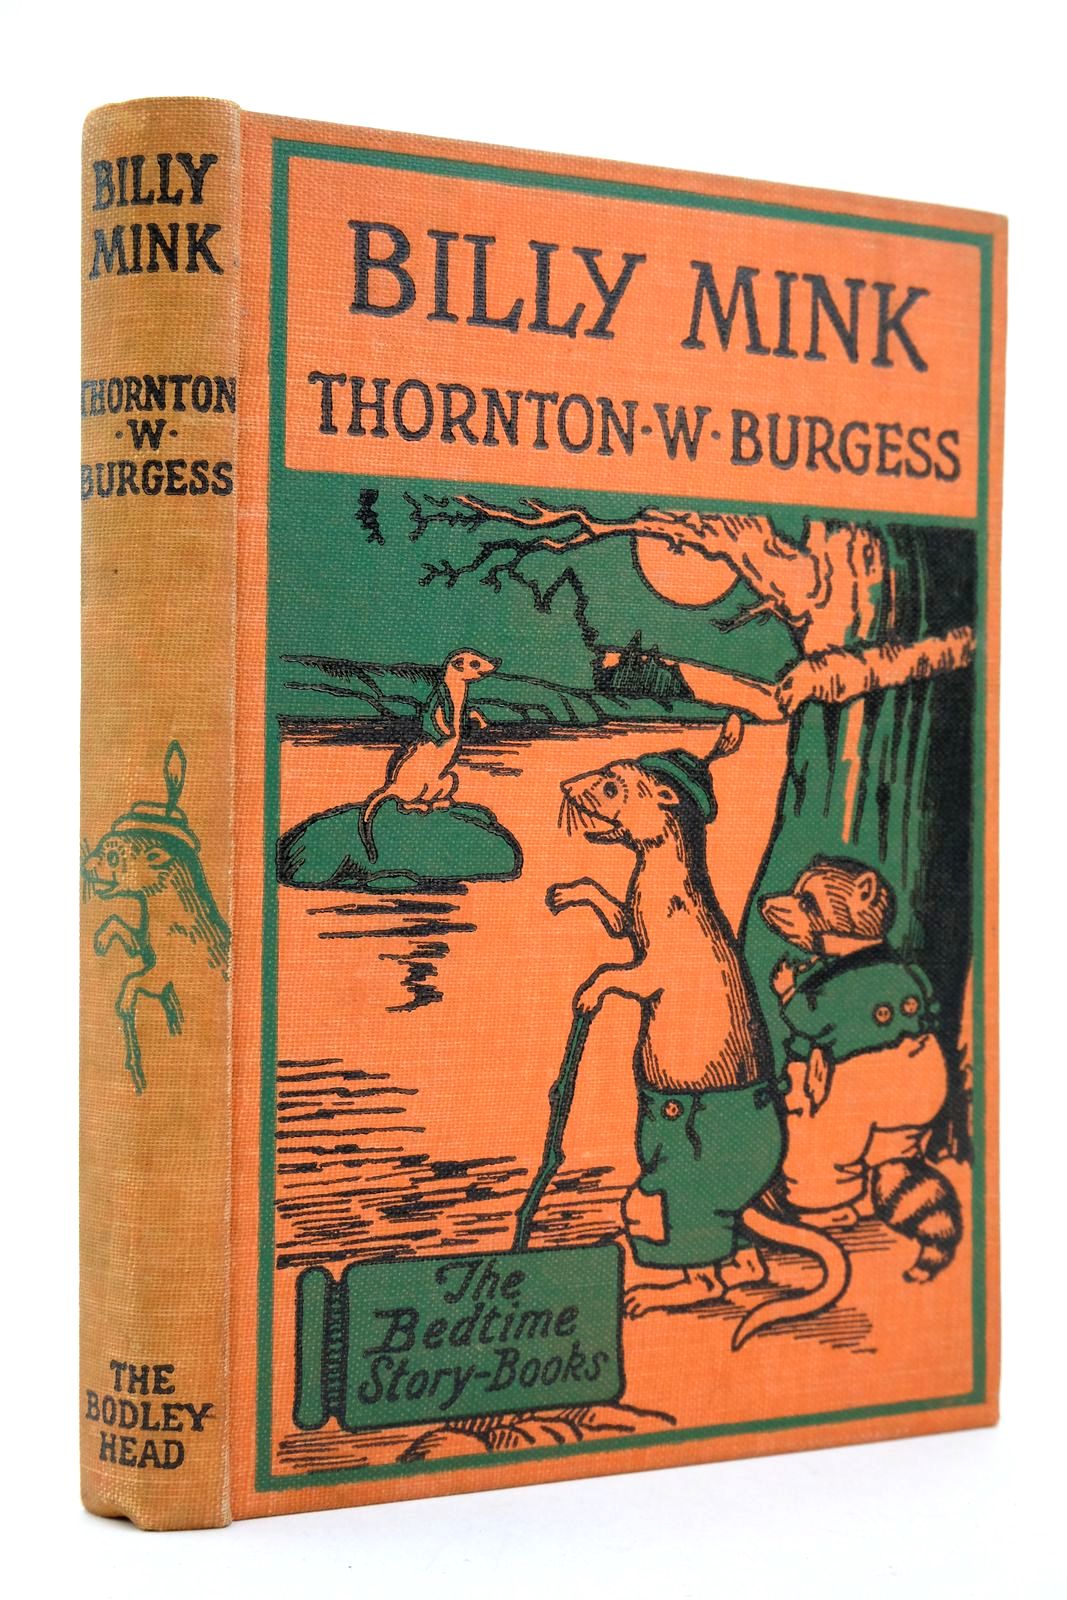 Photo of BILLY MINK written by Burgess, Thornton W. illustrated by Cady, Harrison published by John Lane The Bodley Head (STOCK CODE: 2139956)  for sale by Stella & Rose's Books